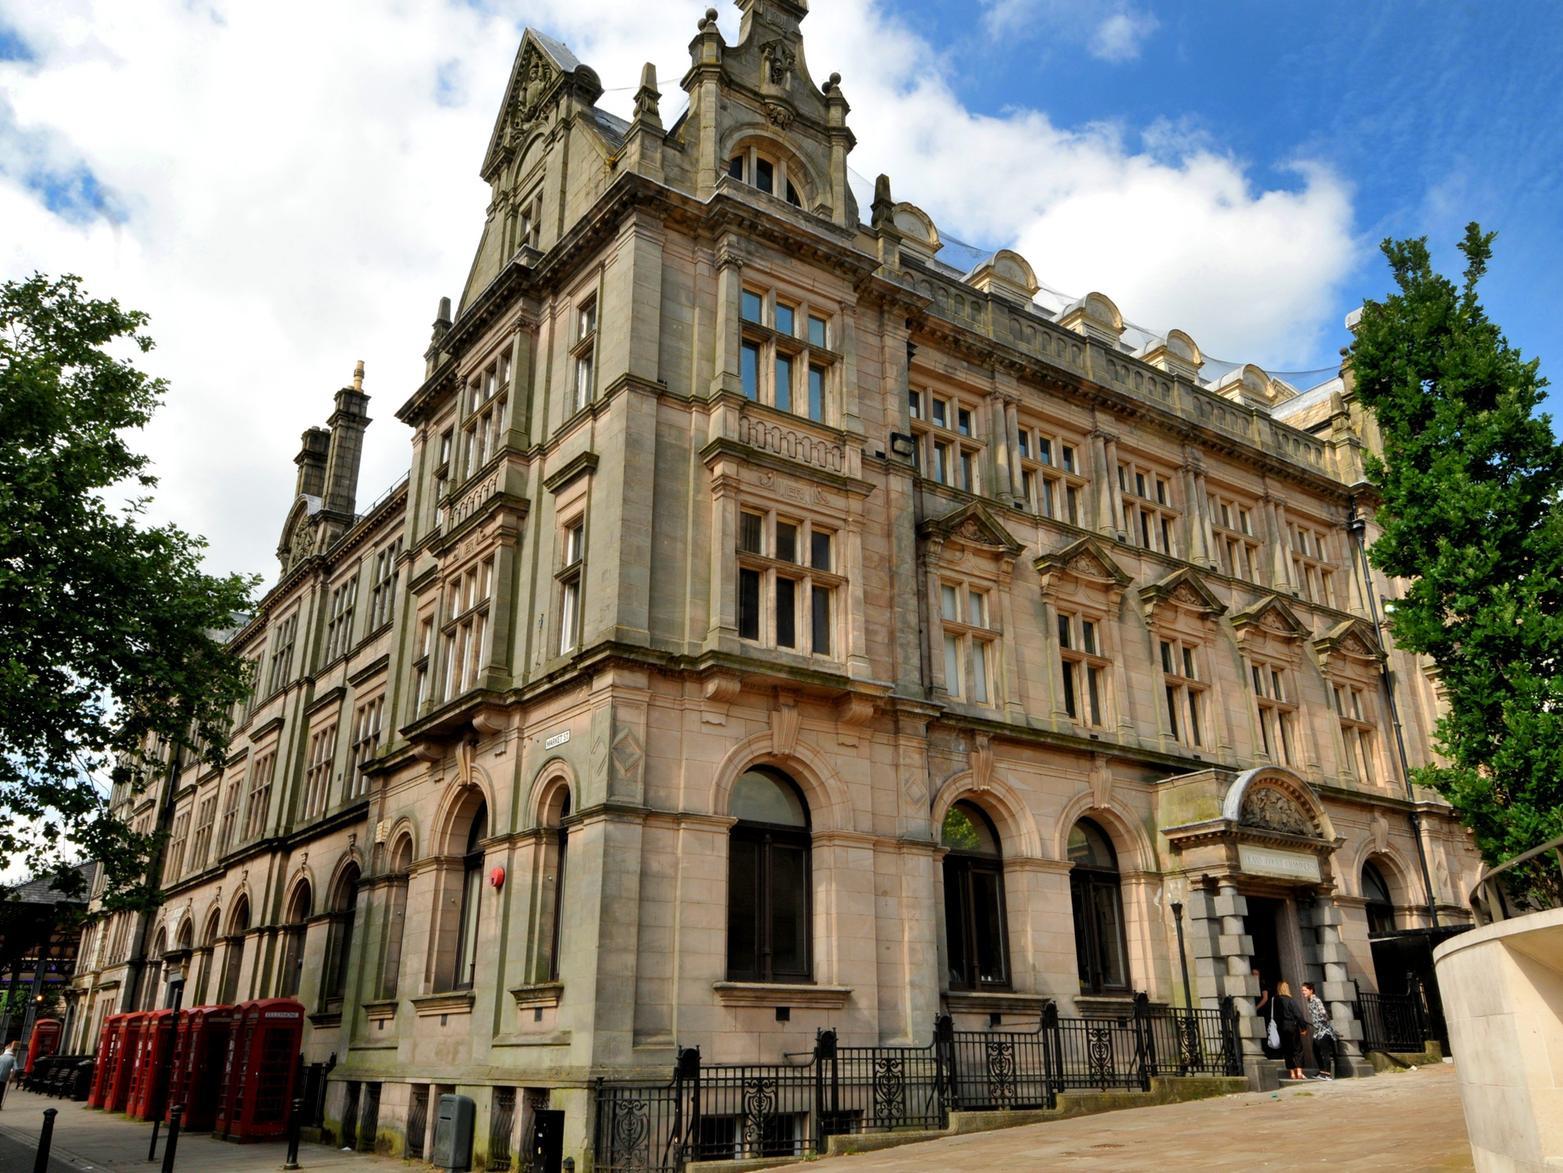 Plans to transformPrestonsformerpost office, which closed in 2005, into a luxuryhotelwere given the green light in 2016 -work to transform the 1903 structure began shortly after.